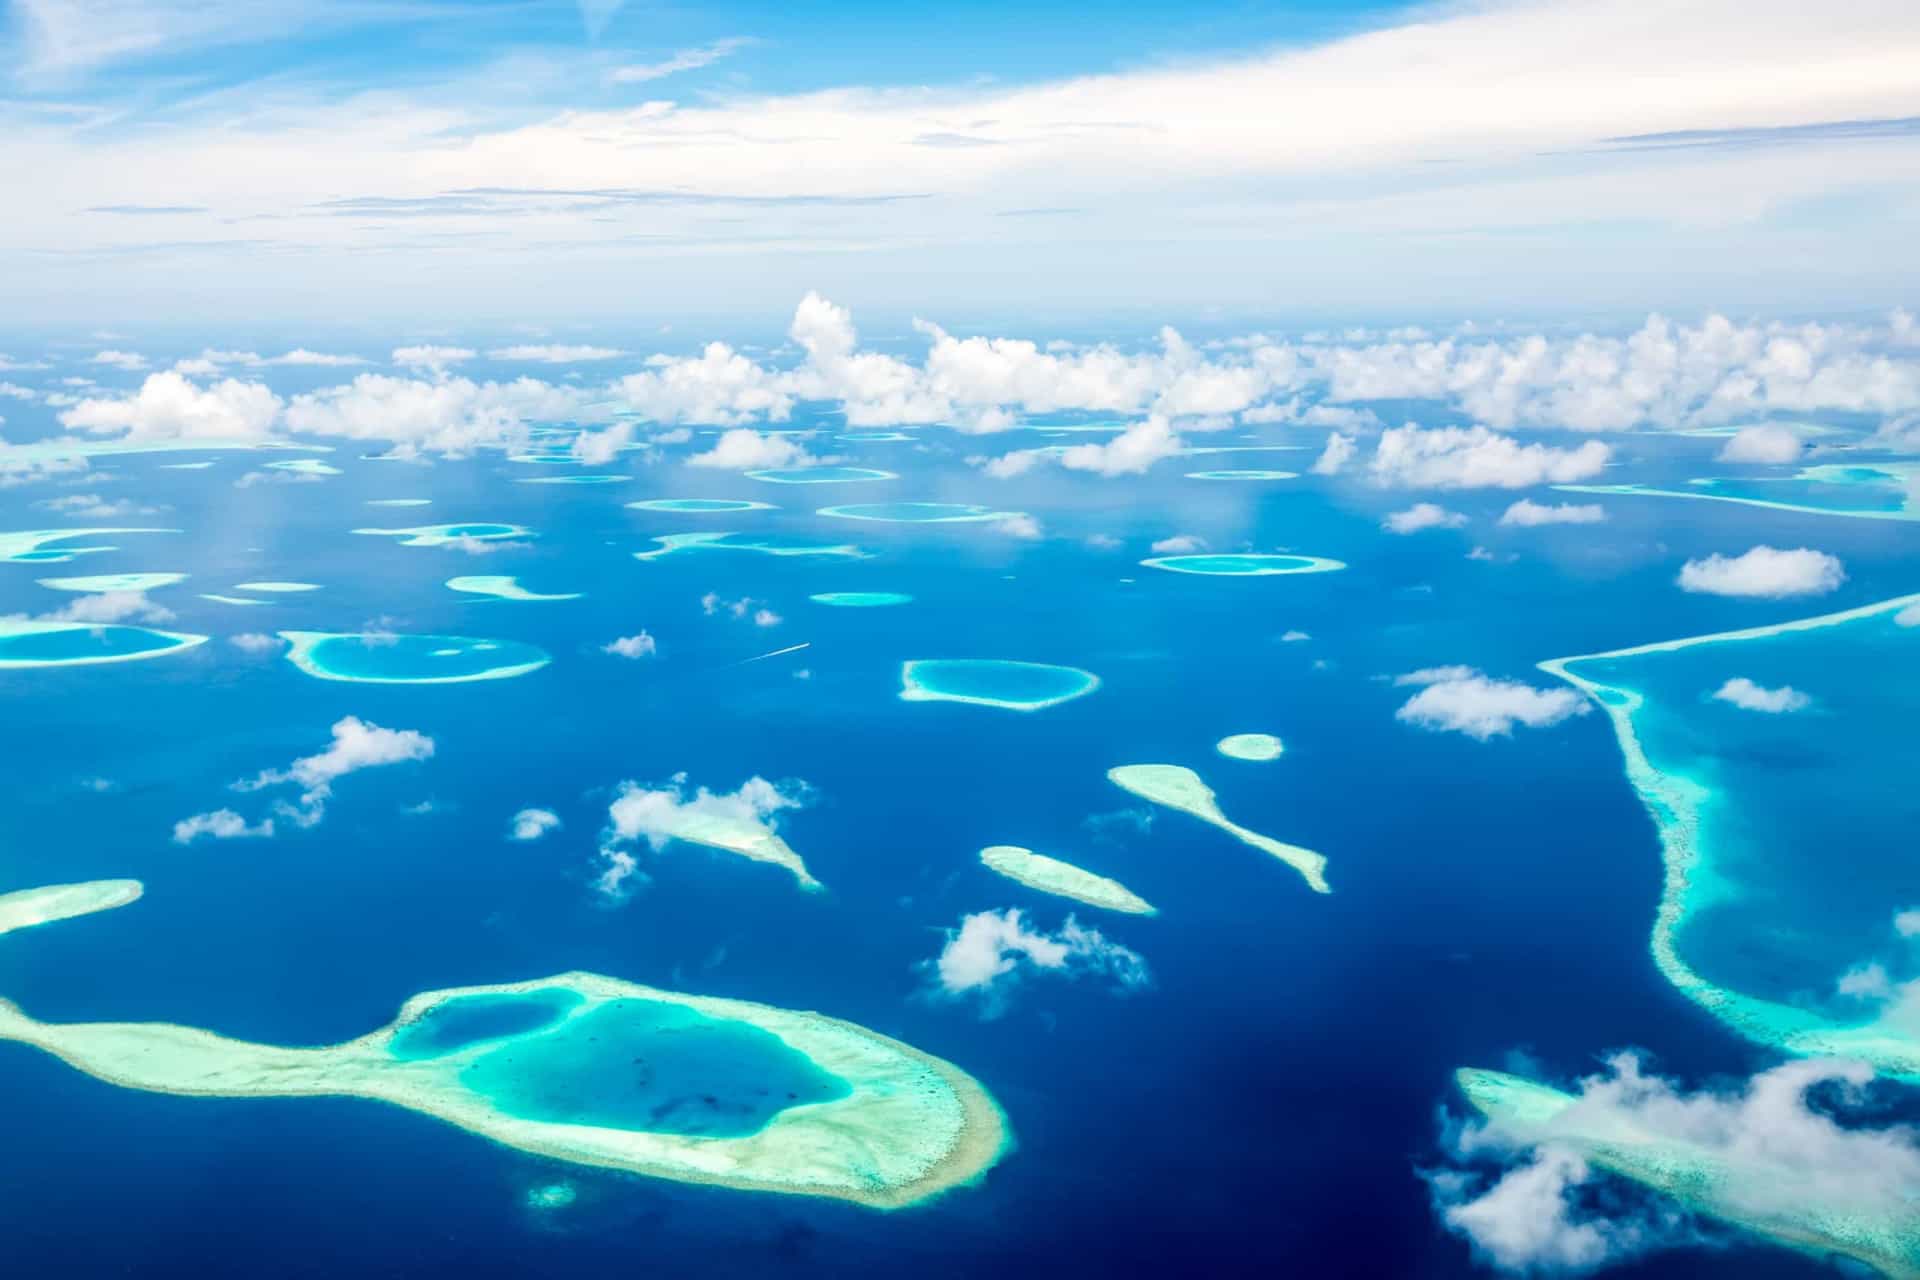 <p>The Maldives is a country of islands. There are around 1,200 islands that are all grouped into atolls, which is just a cluster of islands. The Maldives is the lowest country in the world, with its highest point at only 6 feet (1.8 meters)!</p>